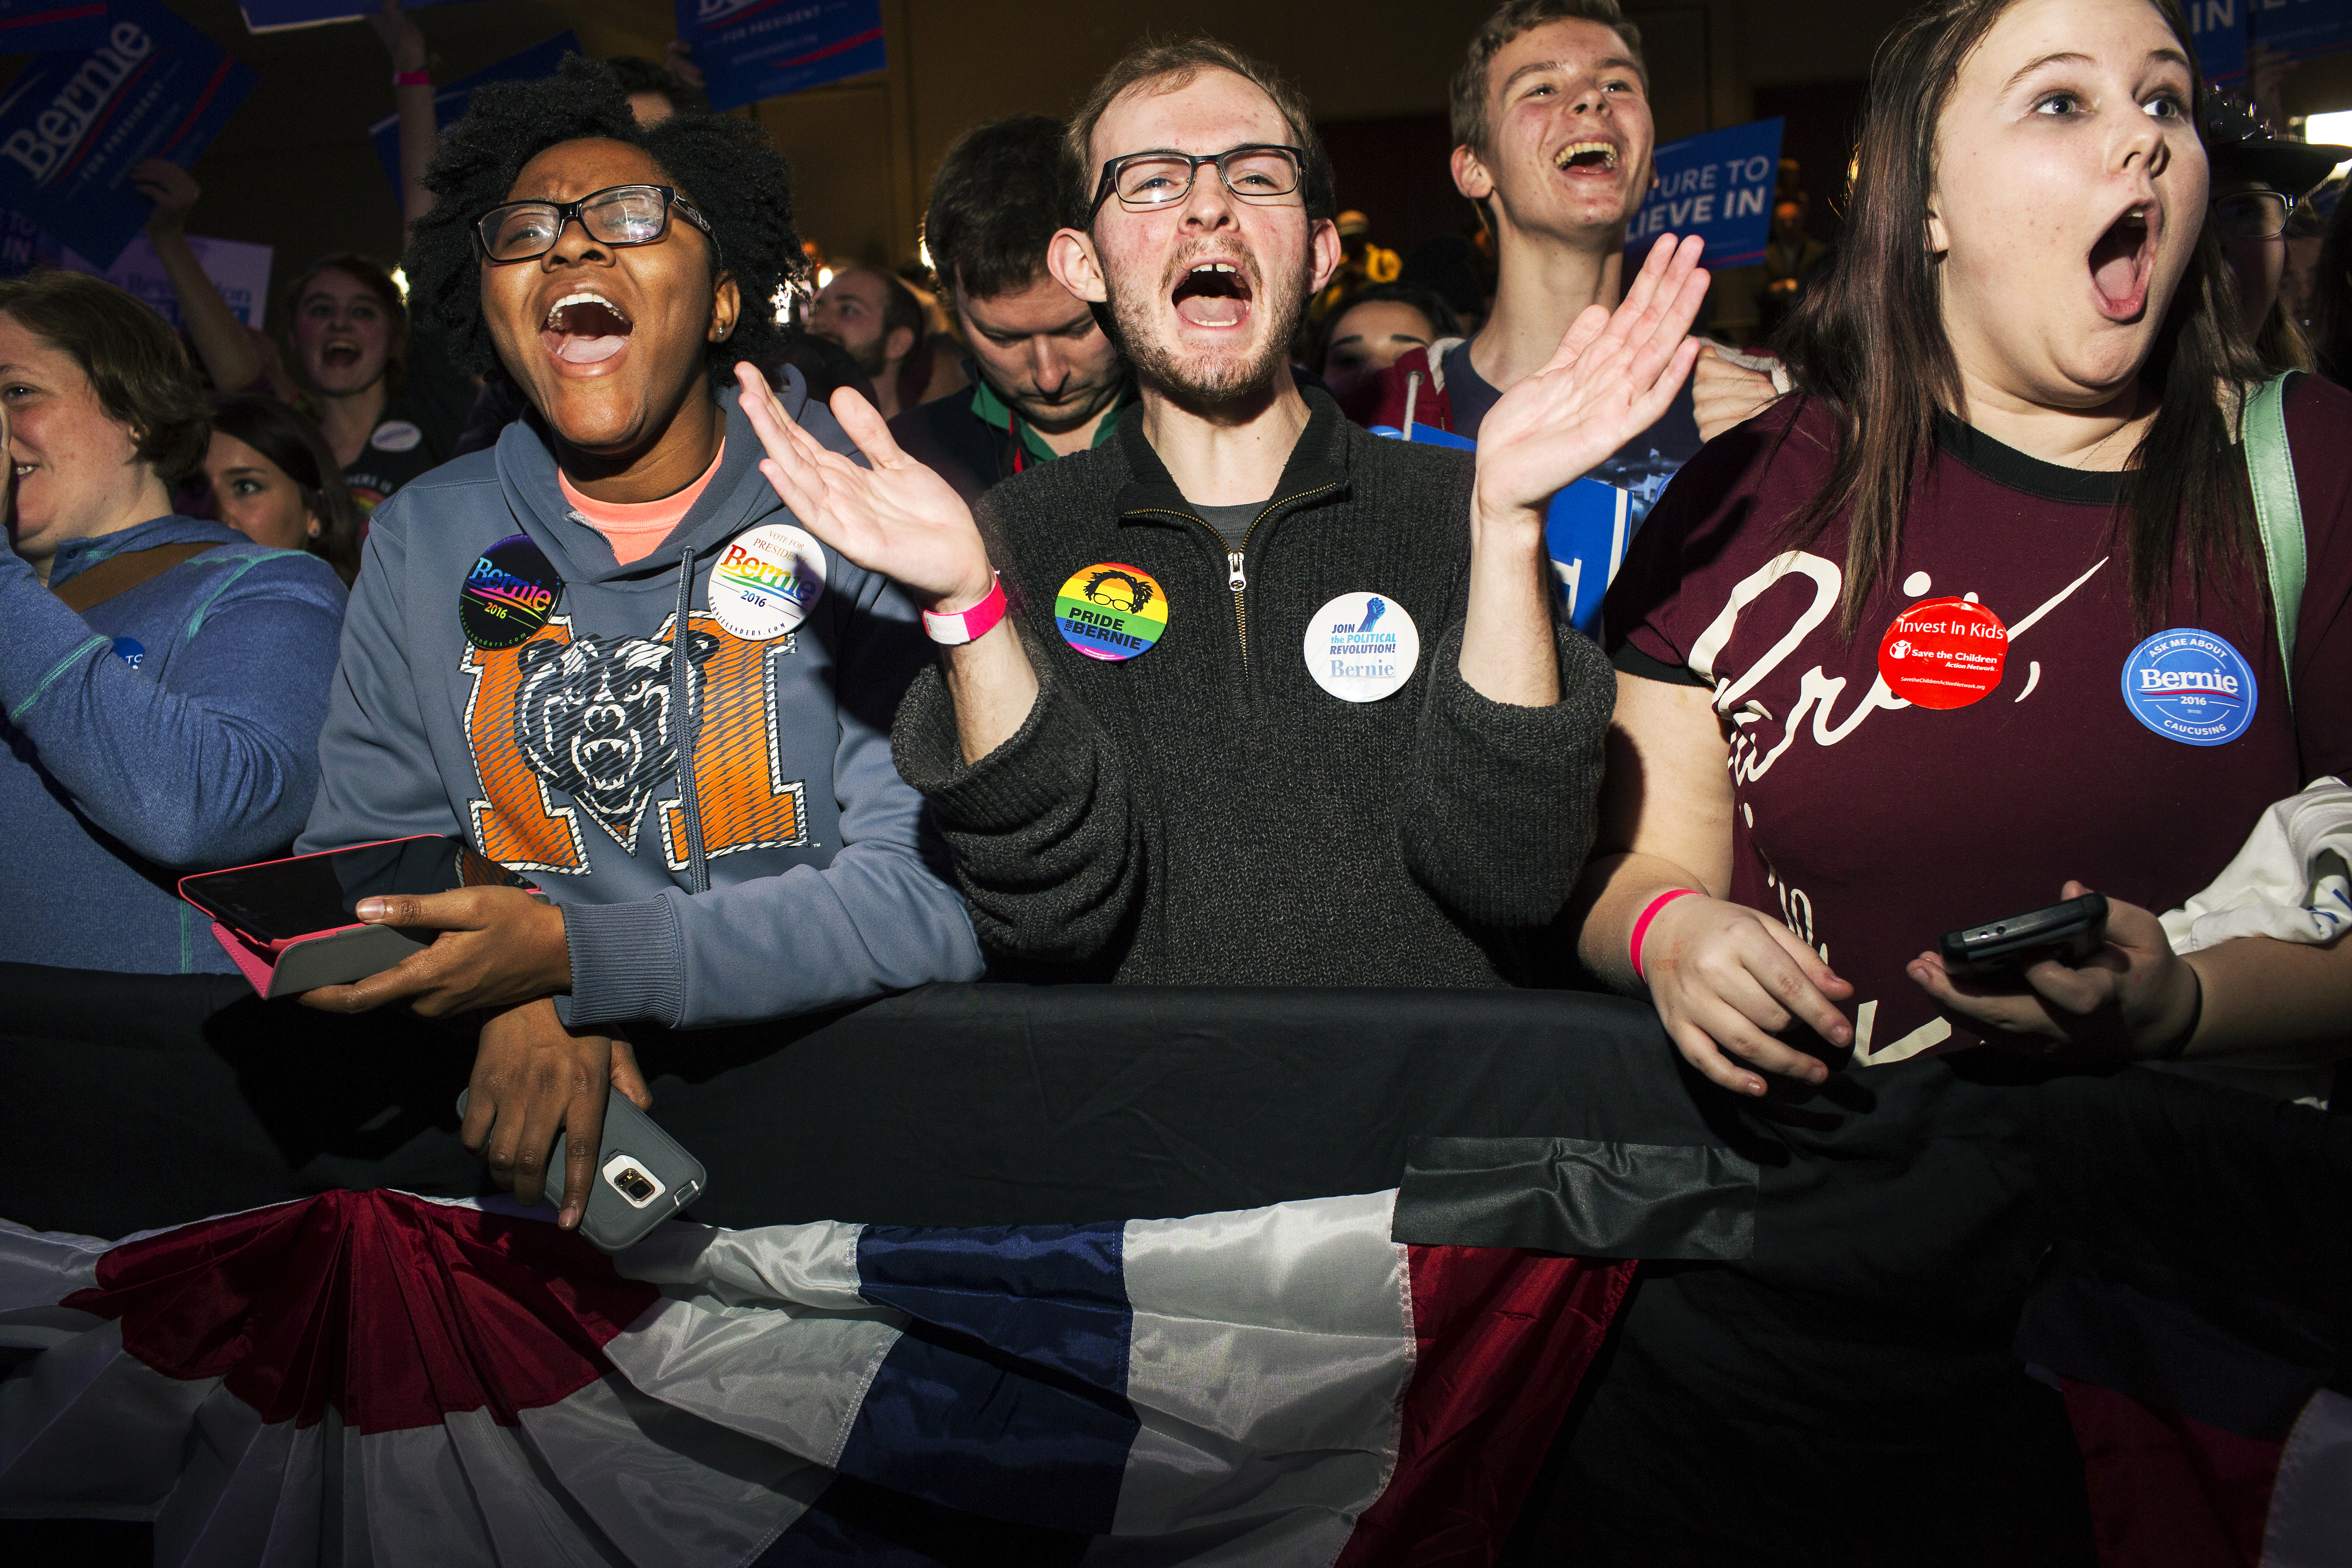 Supporters cheer for Vermont Sen. Bernie Sanders on caucus night during a rally in Des Moines, Iowa on Feb. 1, 2016.